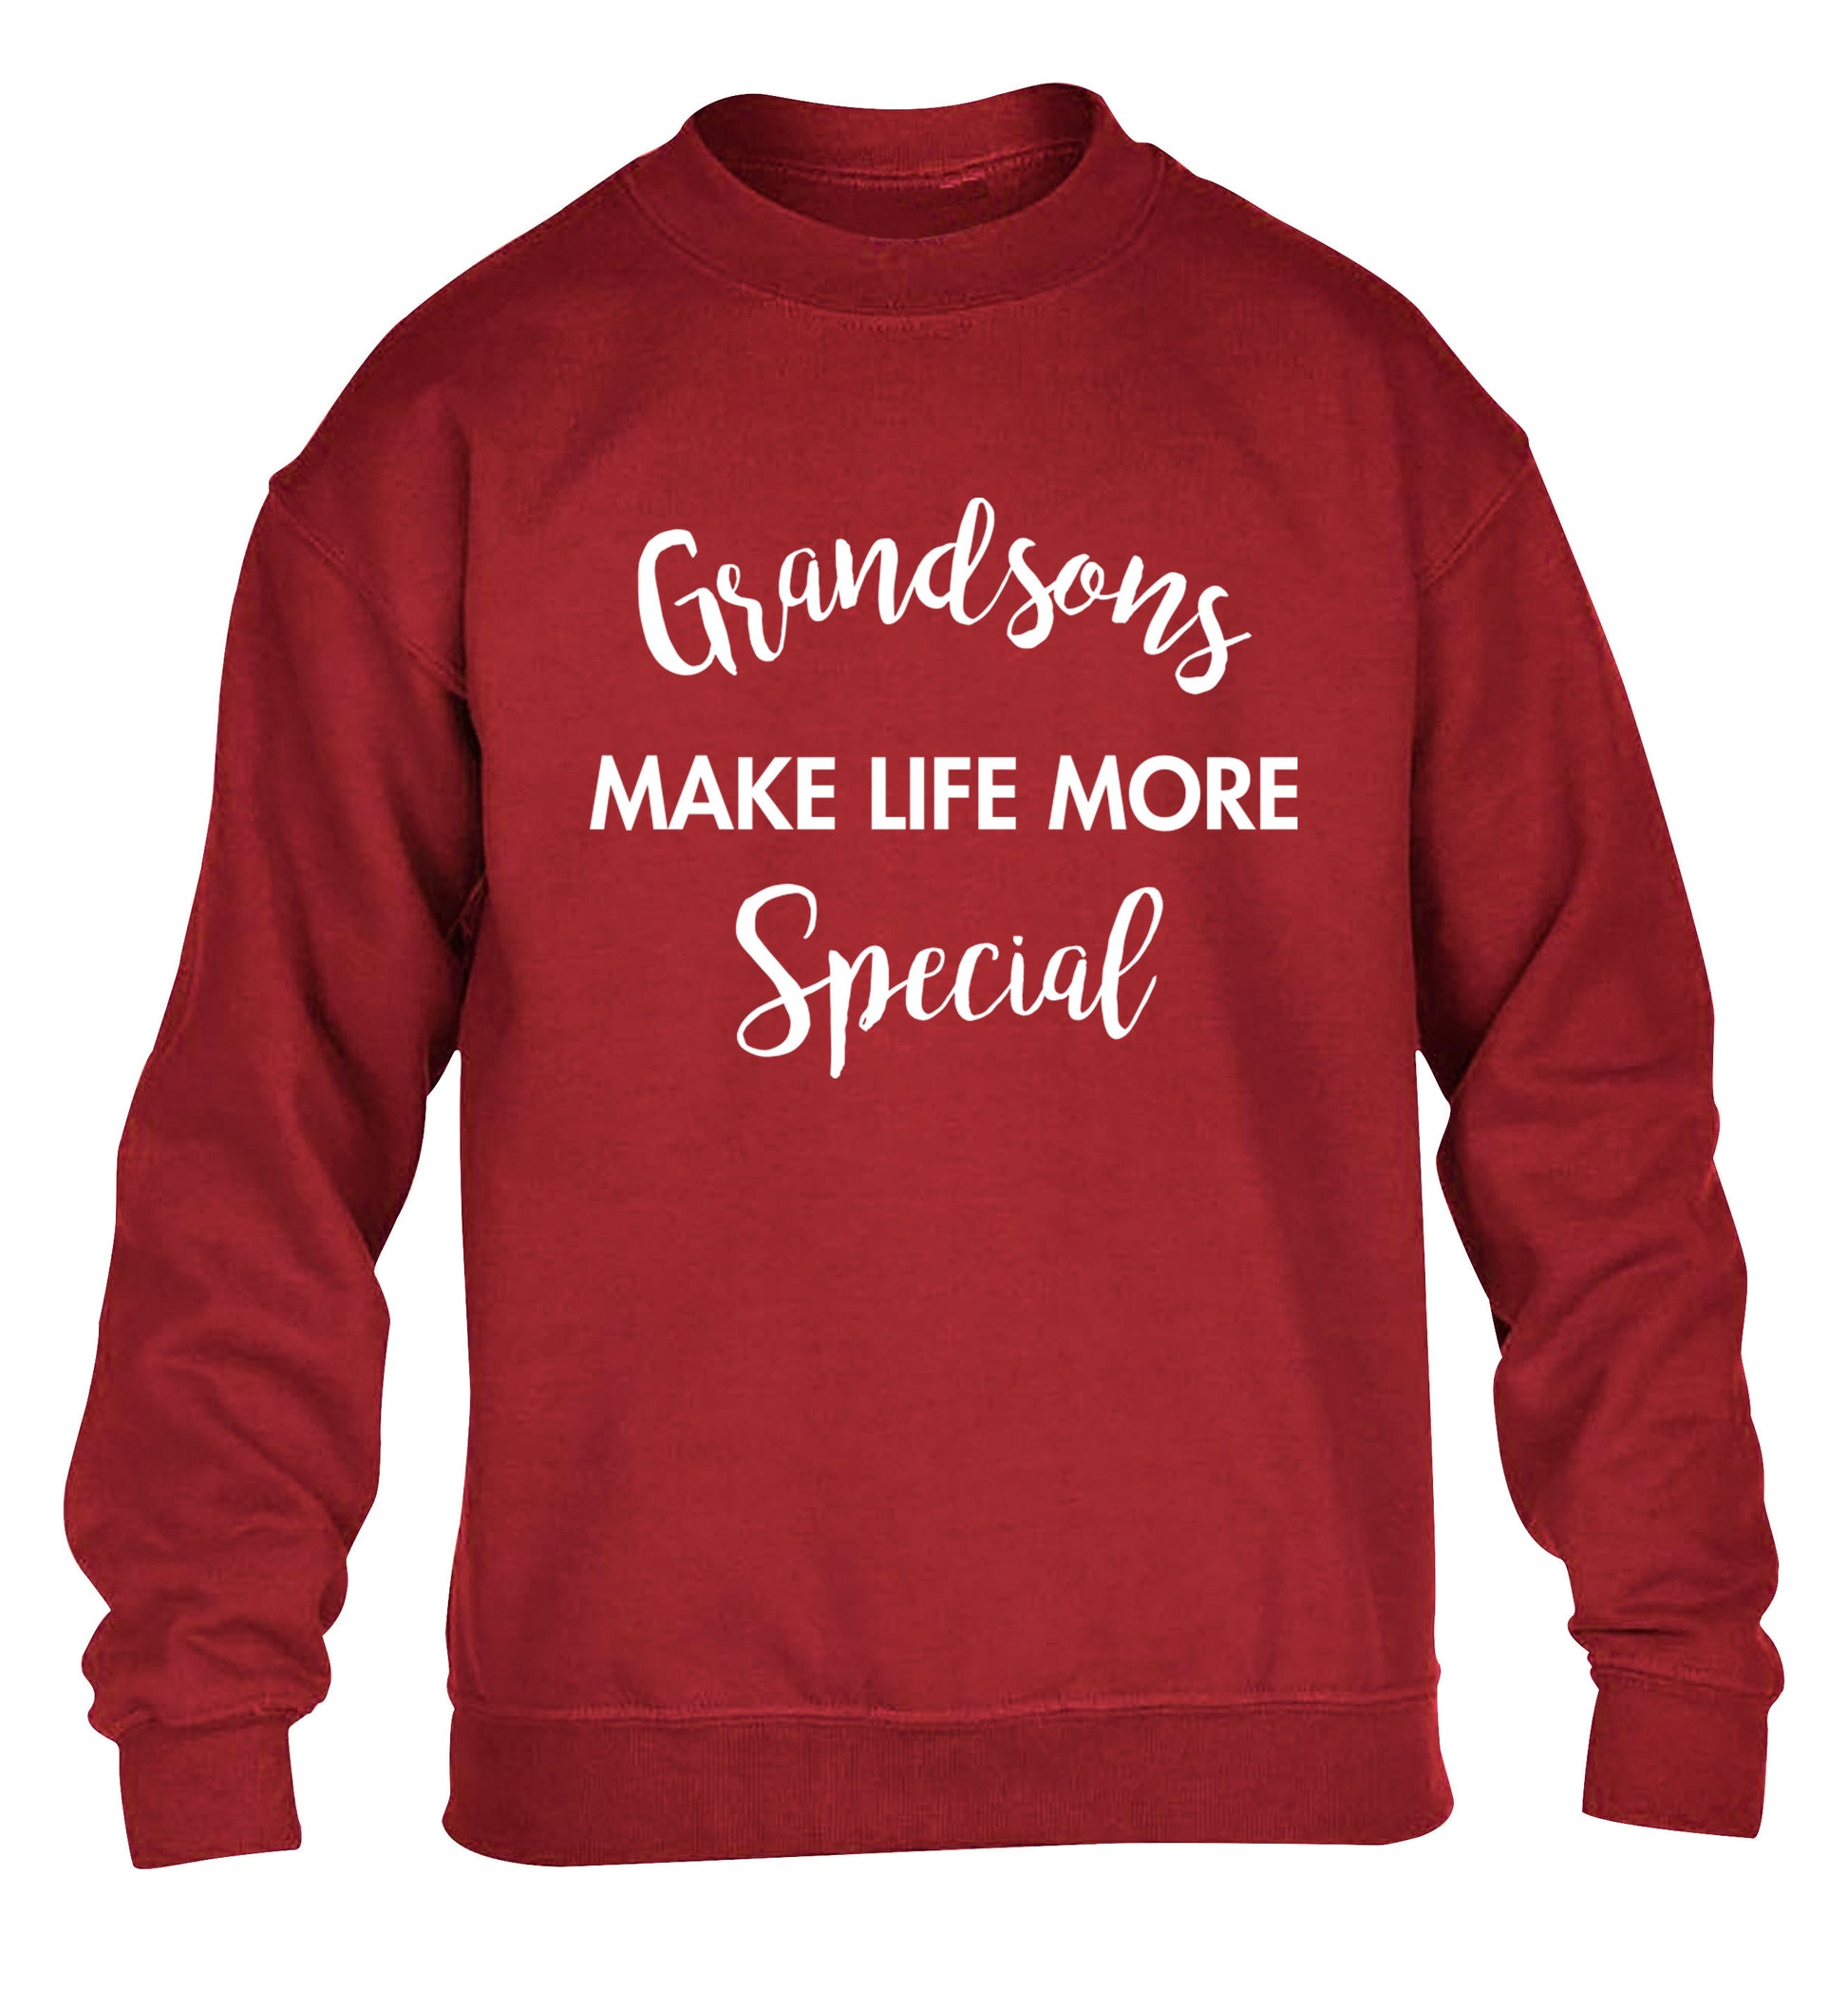 Grandsons make life more special children's grey sweater 12-14 Years